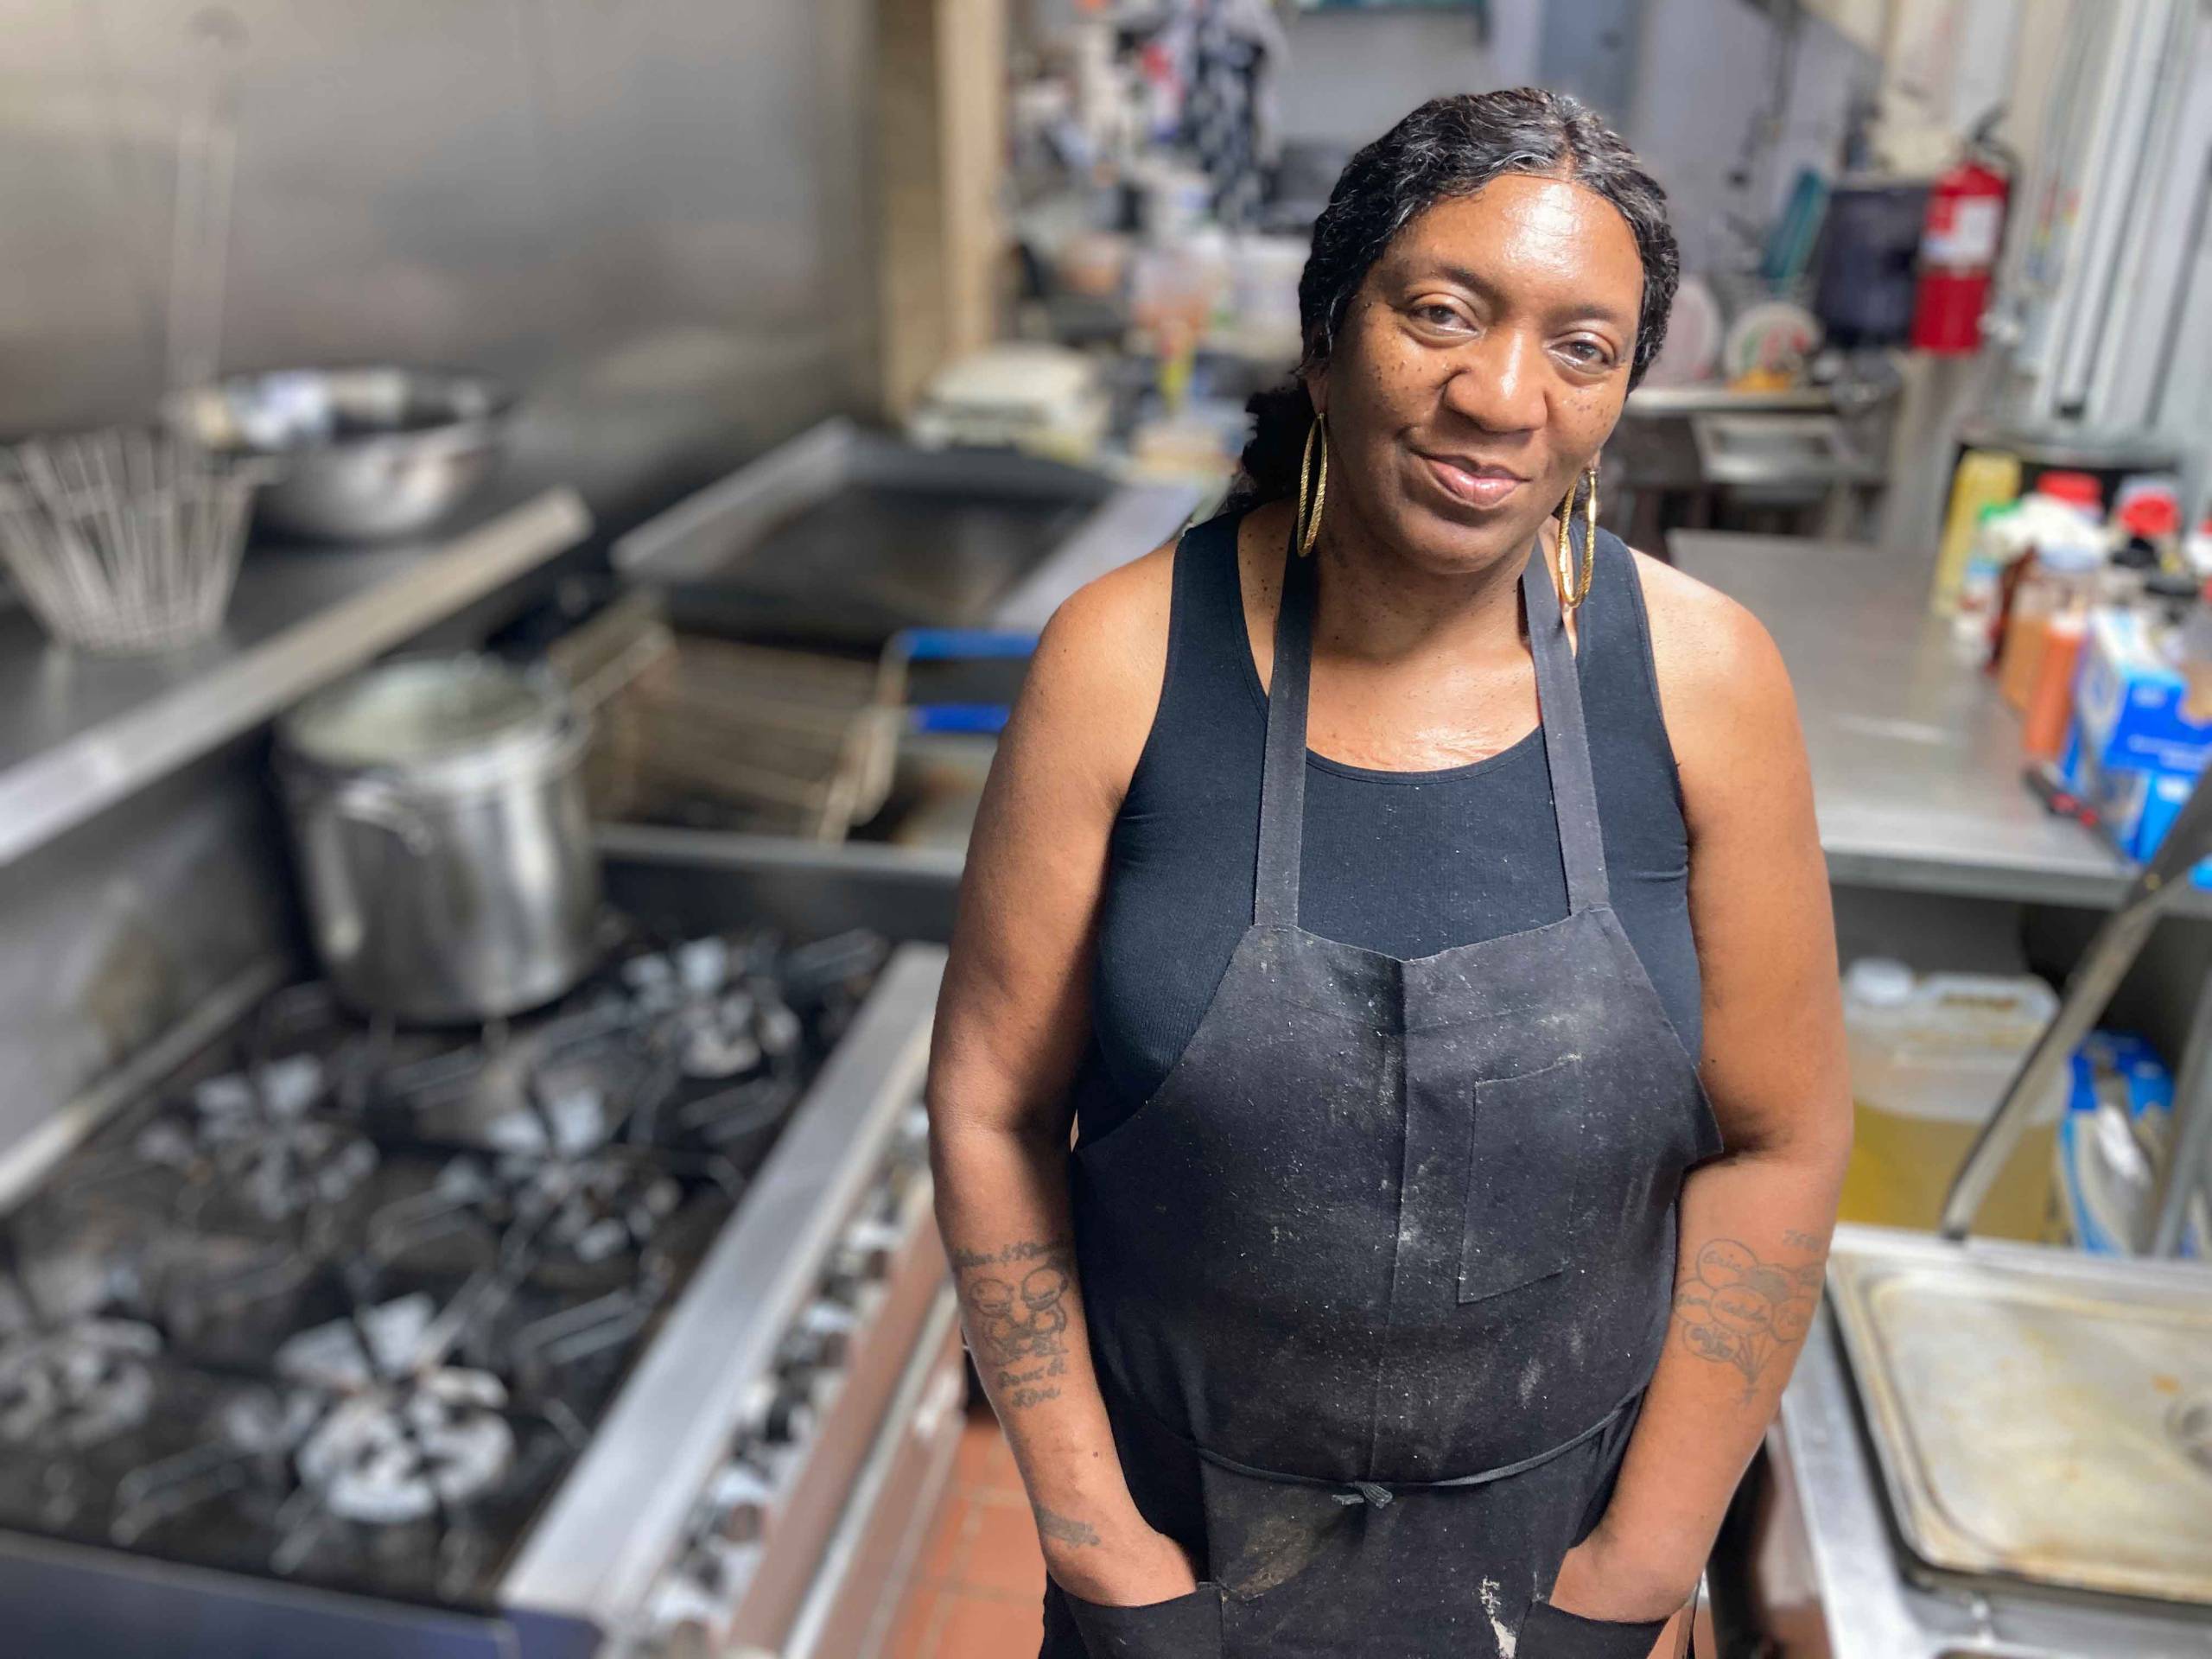 A Black woman in tank top and black apron and gold hoop earrings poses in an industrial kitchen, next to a range.